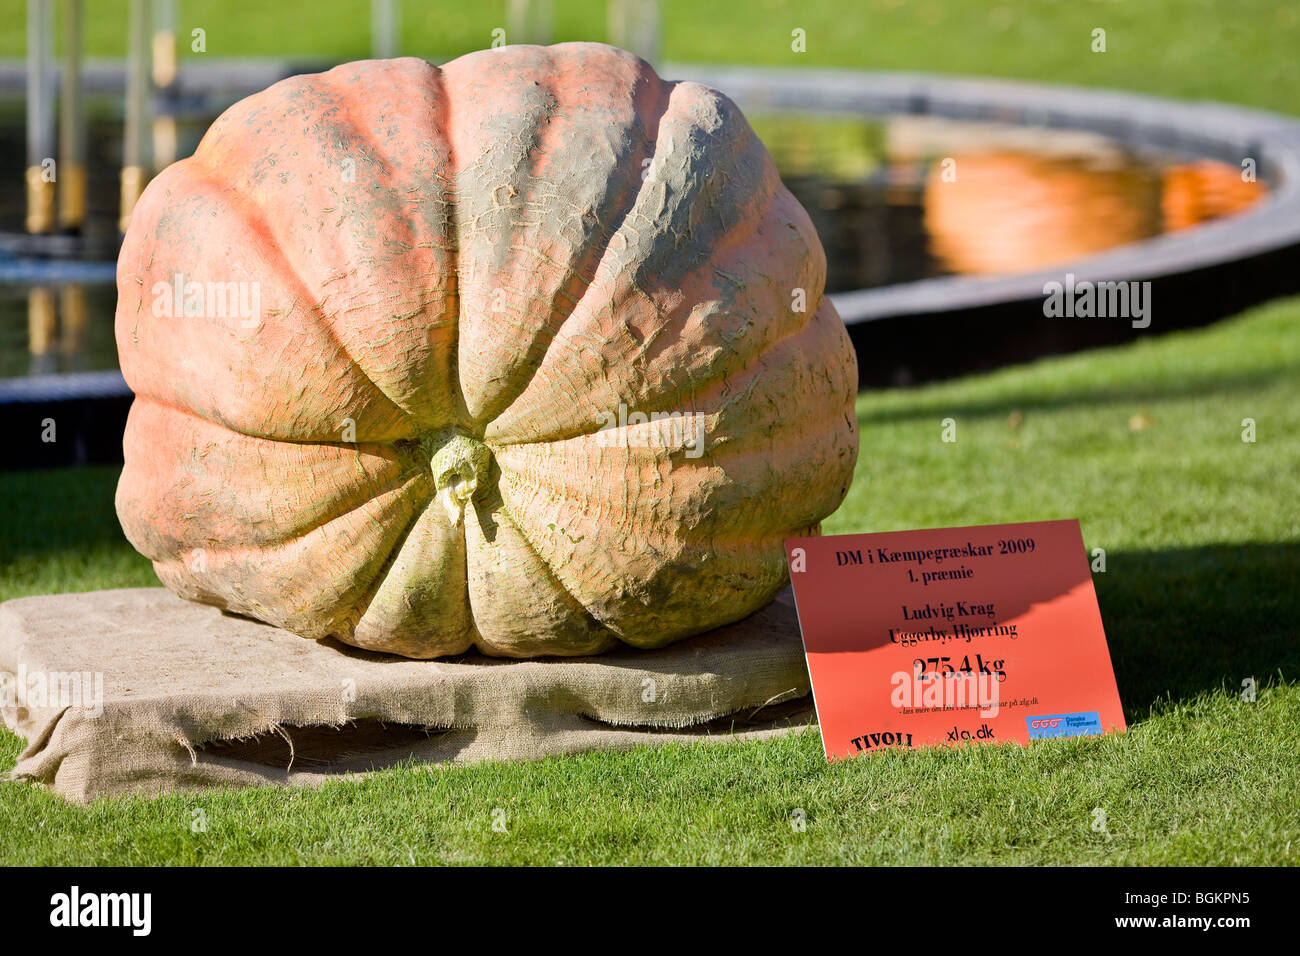 The Danish number one 275, 4 kg giant pumpkin Stock Photo